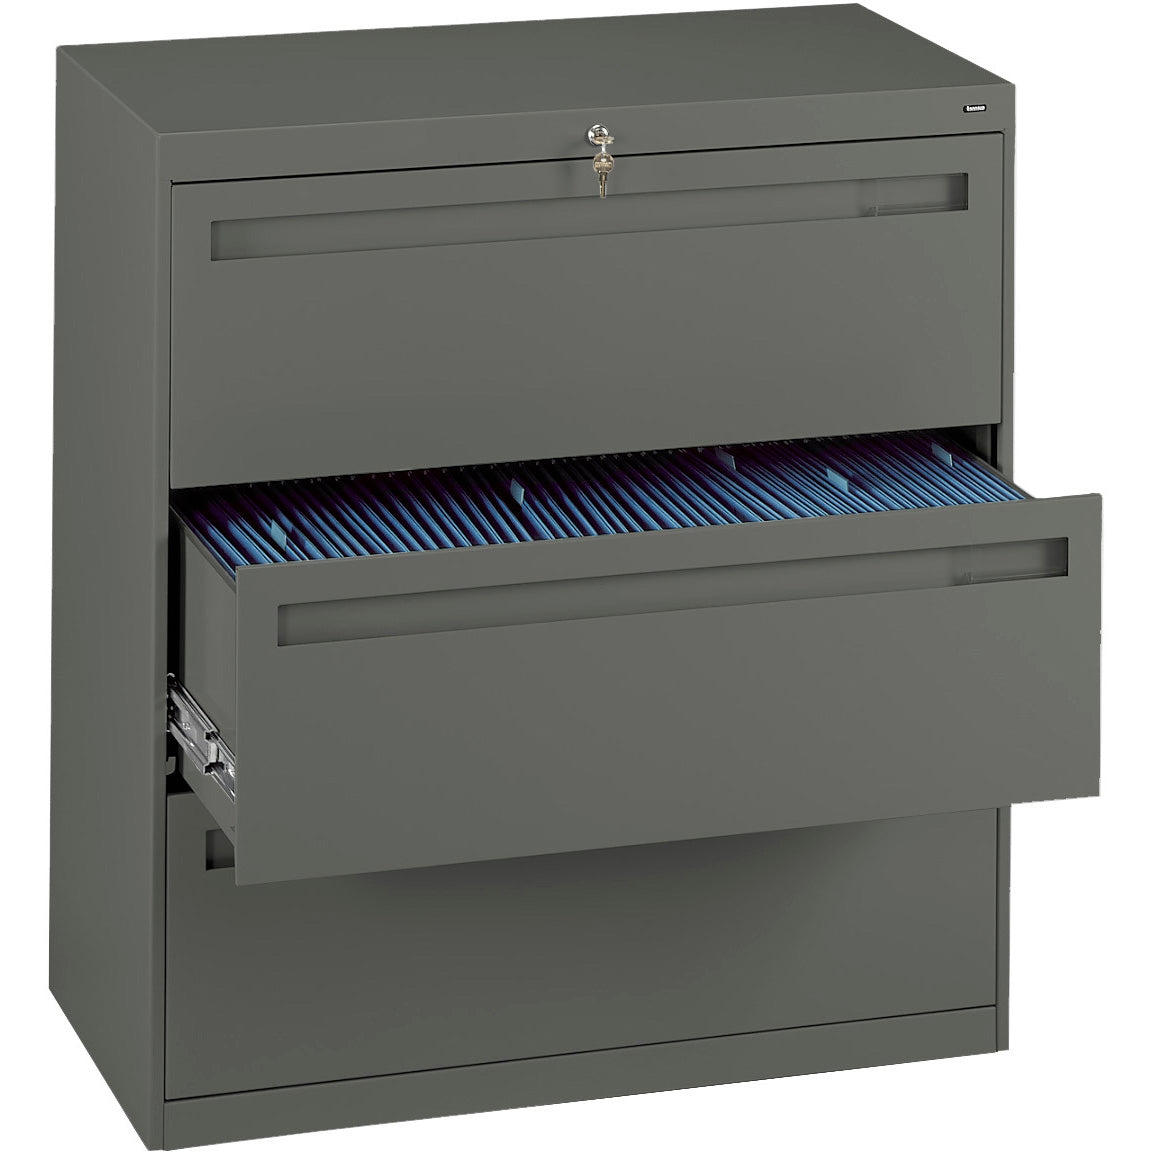 Tennsco 36" Wide Three-Drawer Lateral File with Retractable Doors, LPL3636L31